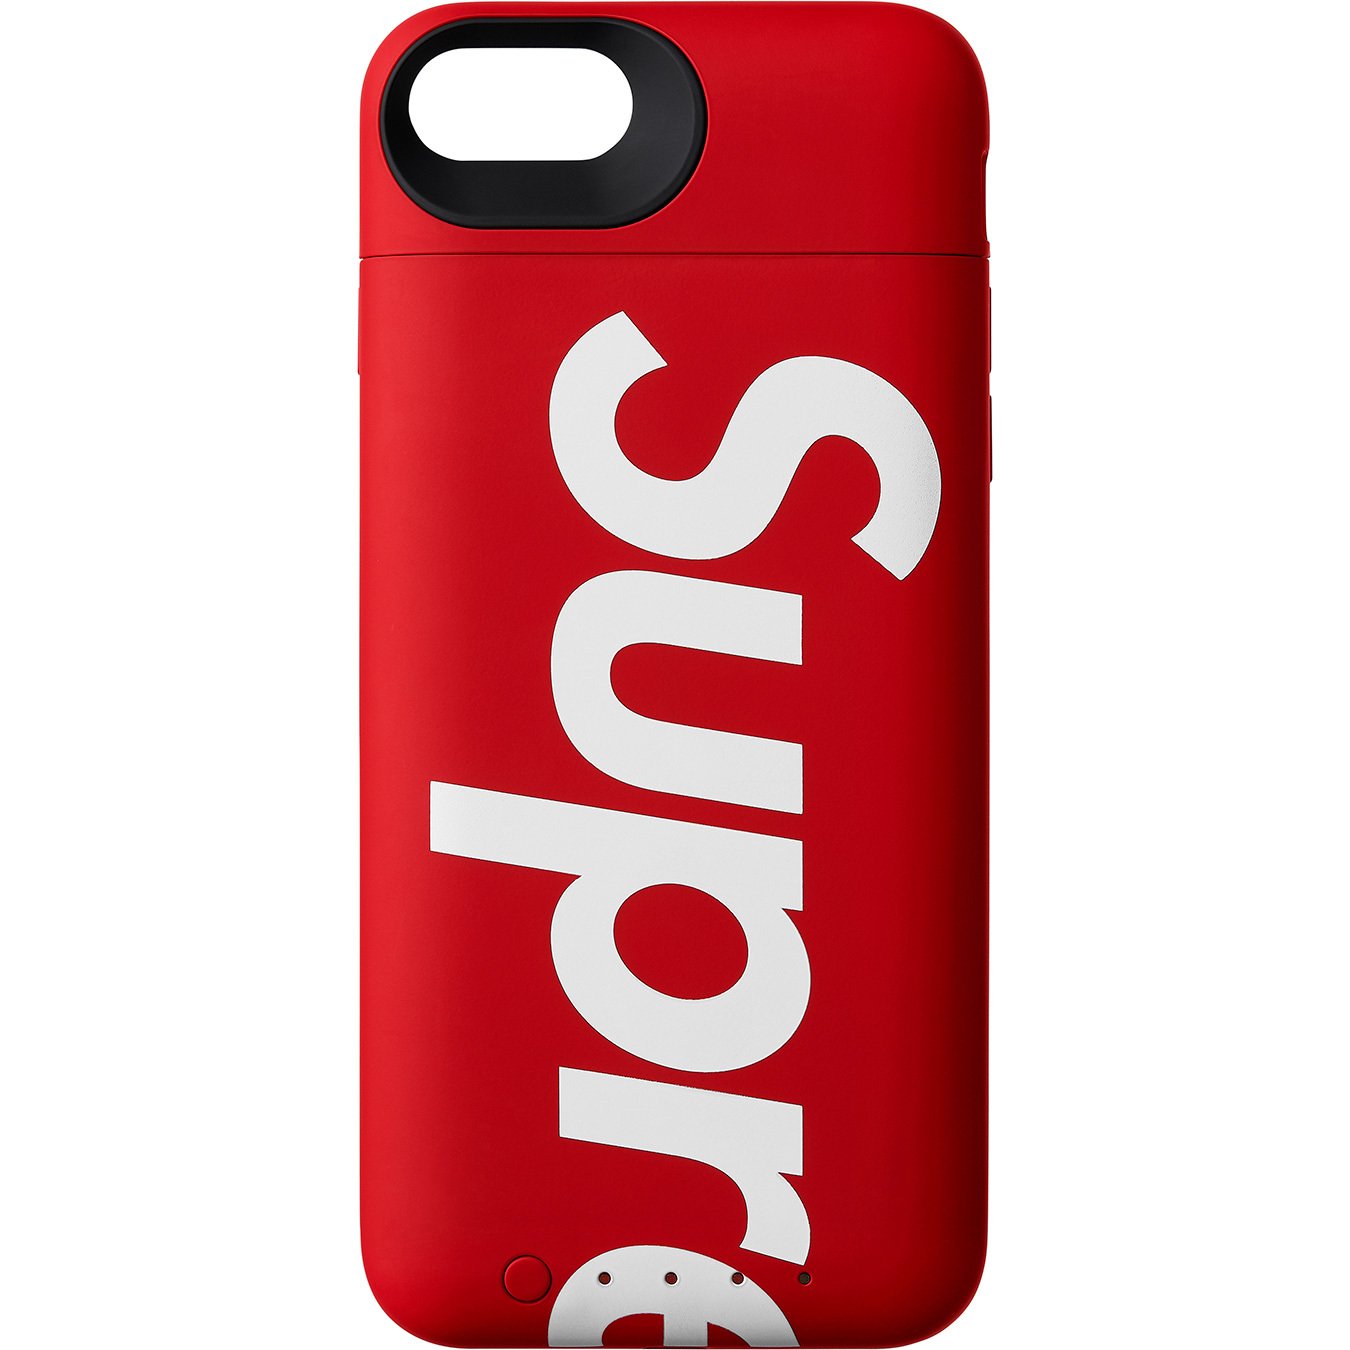 mophie iPhone 8 Juice Pack Air - fall winter 2018 - Supreme